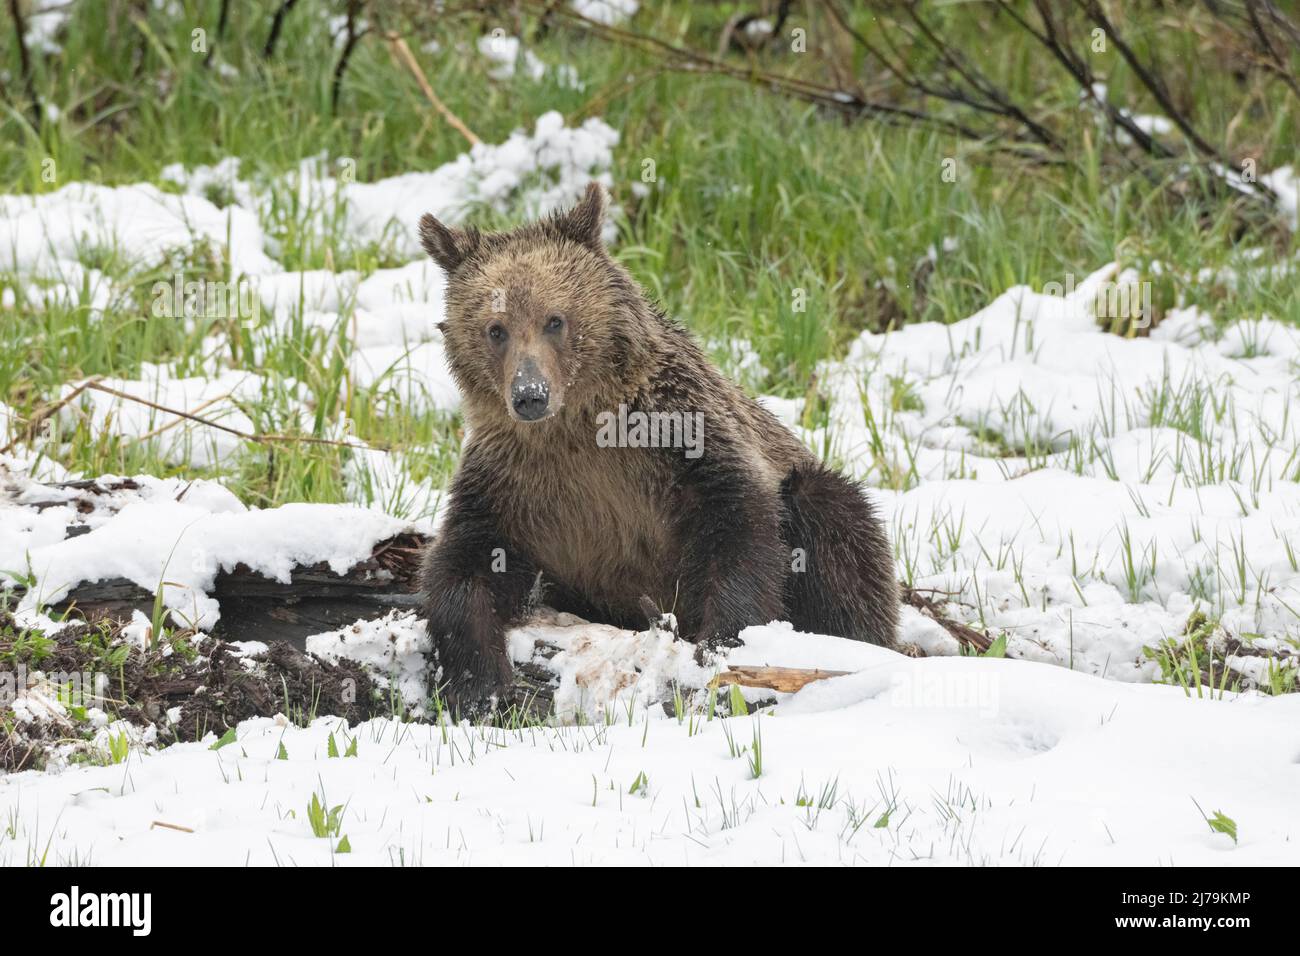 Grizzly Bear (Ursus arctos horribilis) in Yellowstone National Park, Wyoming, USA. Stock Photo